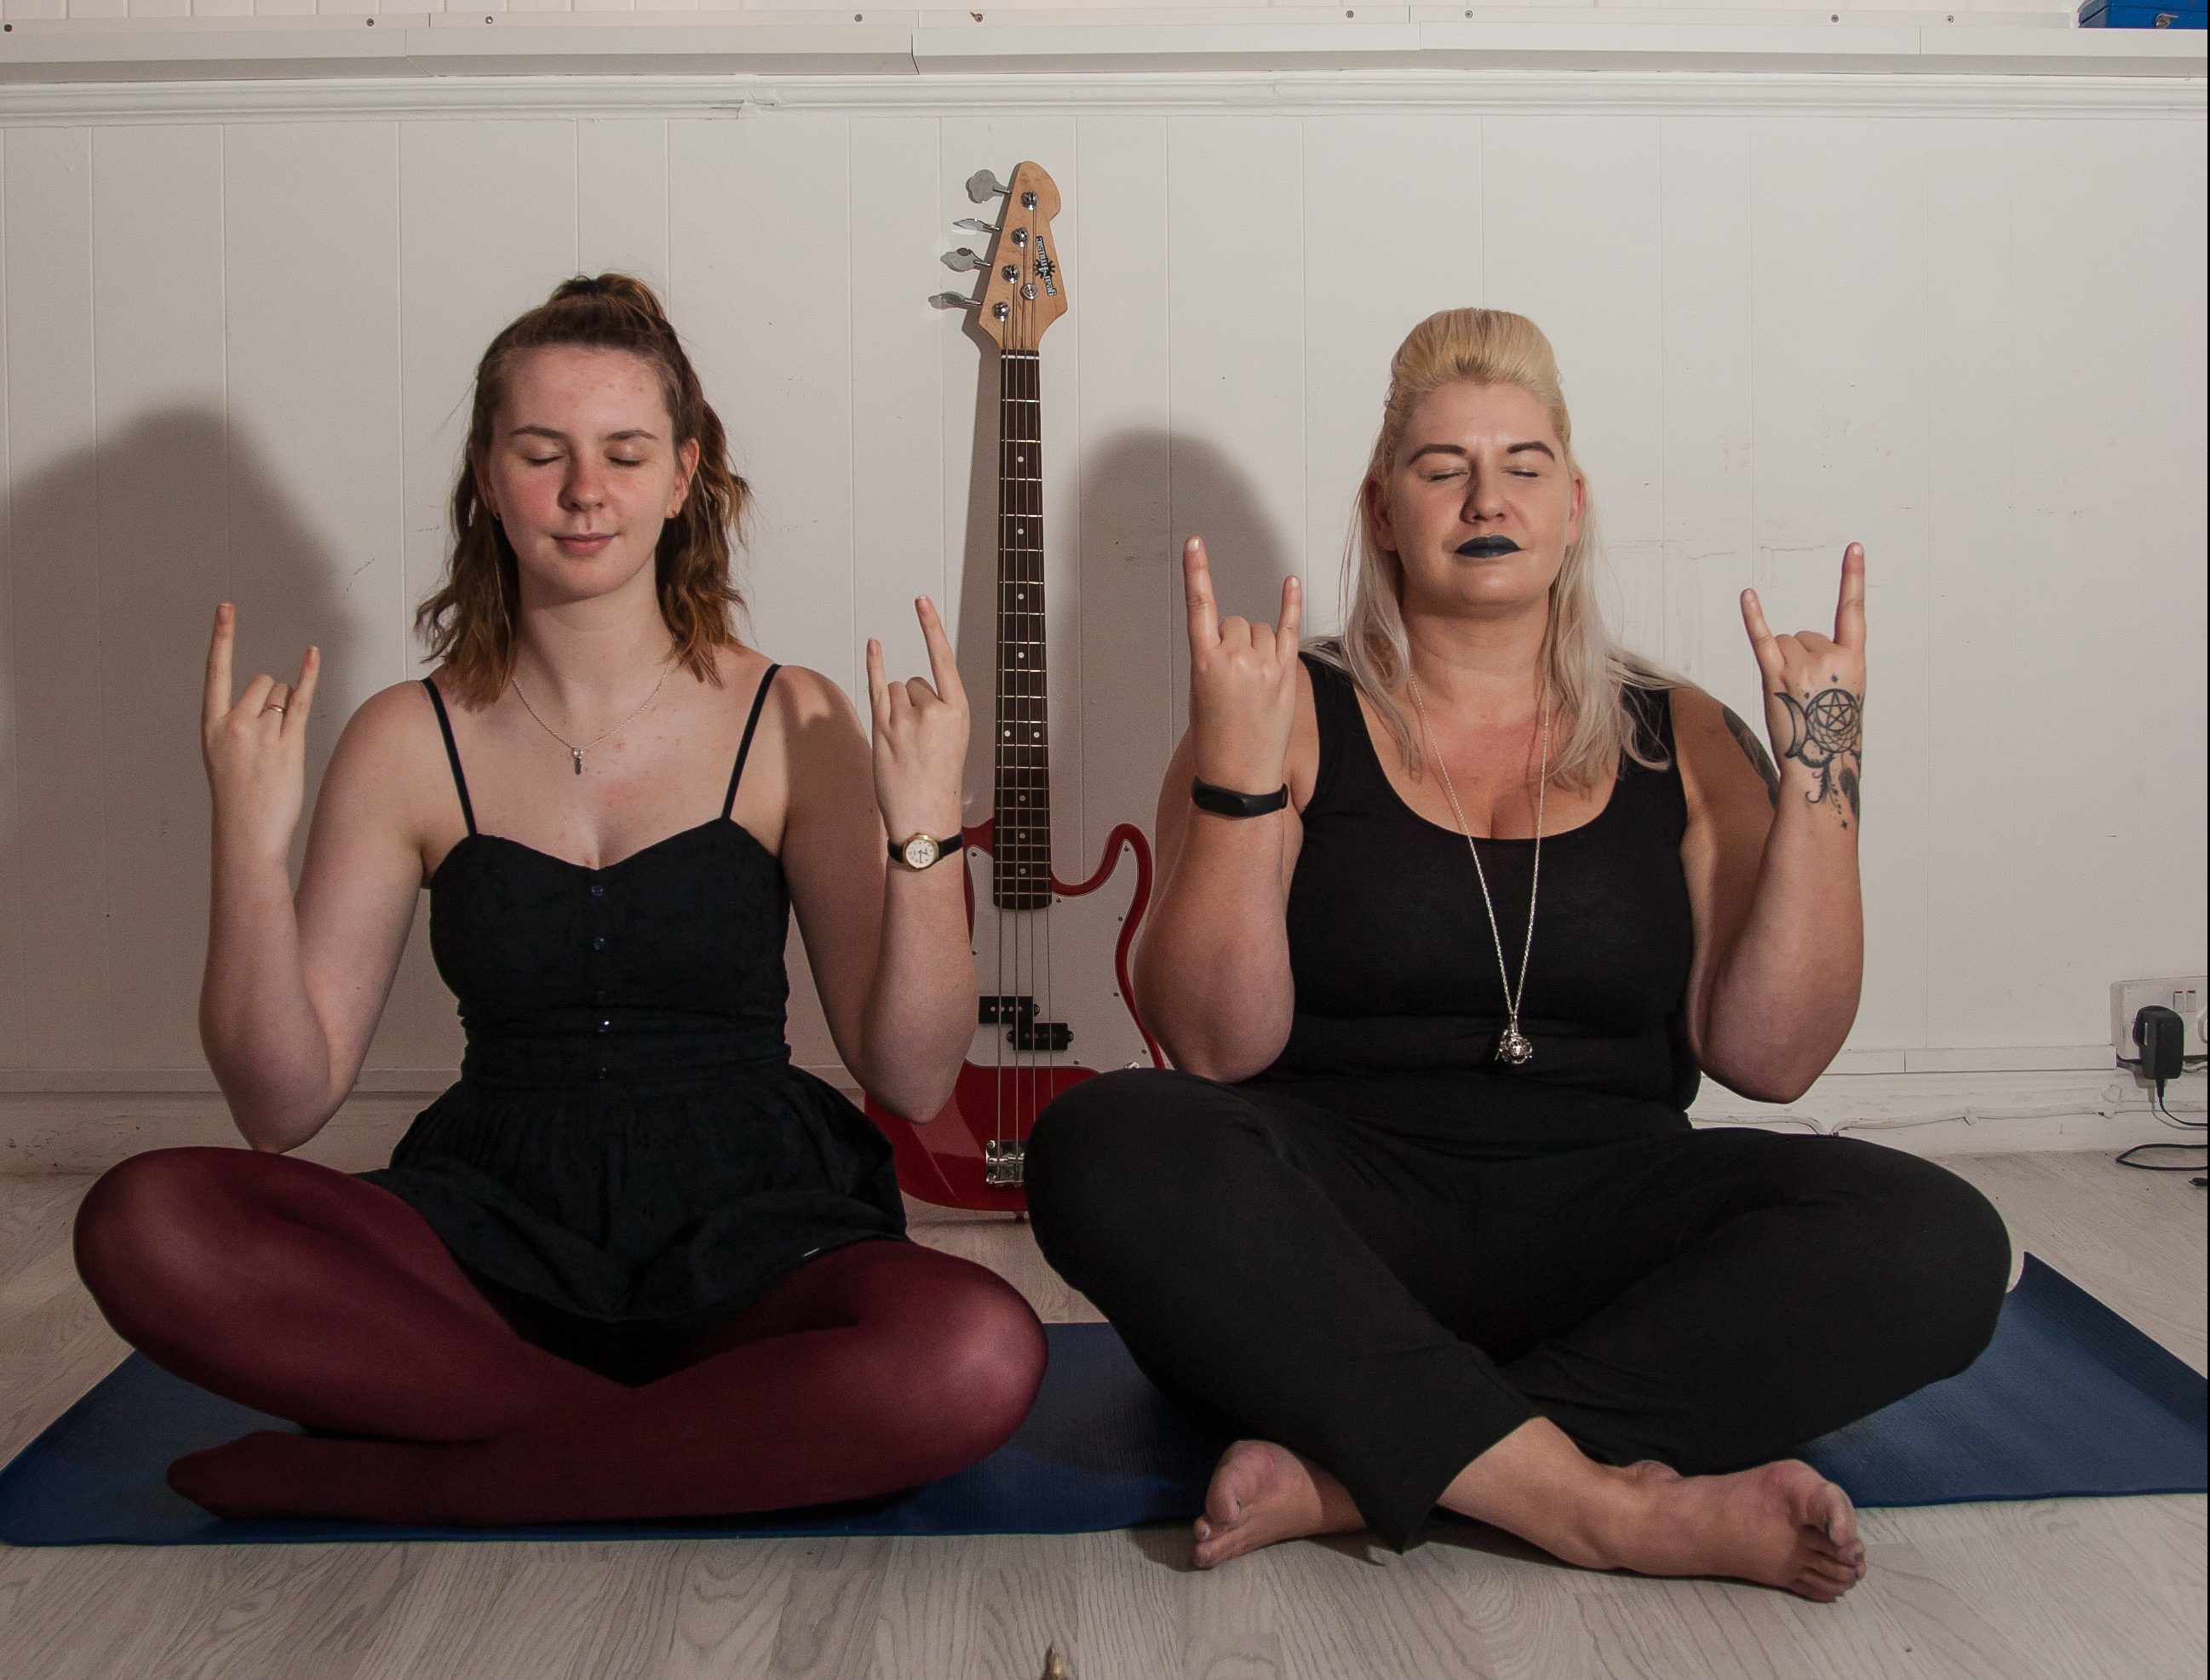 Amanda Thomson offers meditation classes to heavy metal music at her company Metal Panda Hollistics, The Hall, George Street, Falkirk. From left: Catriona Thomson and Amanda Thomson (Catriona's aunt) (Tina Norris)